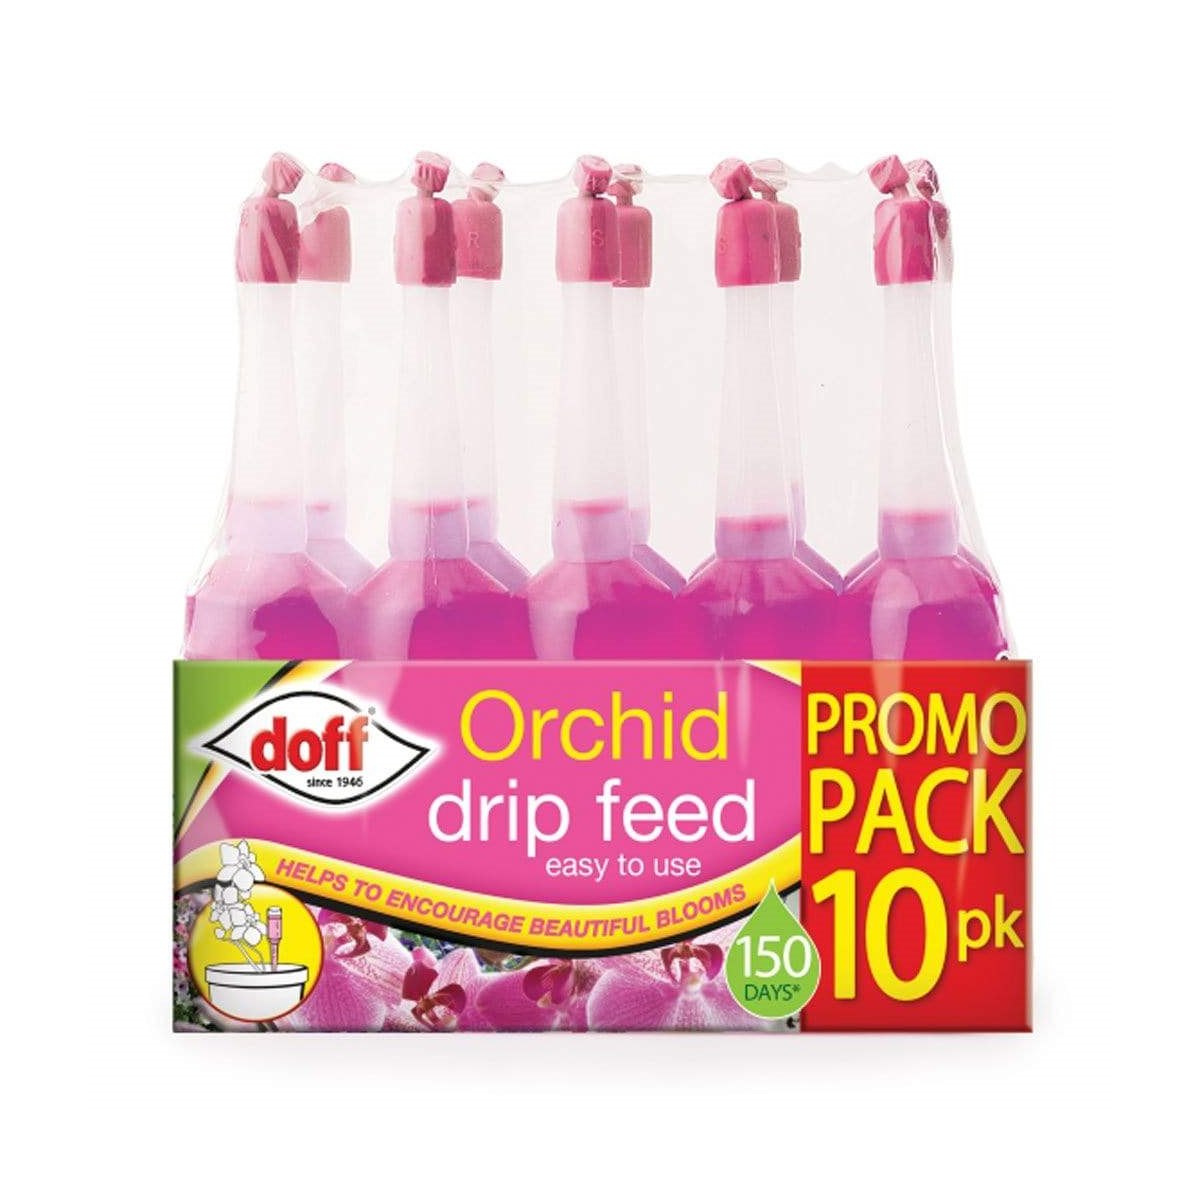 Doff Orchid Drip Feed 10 Pack